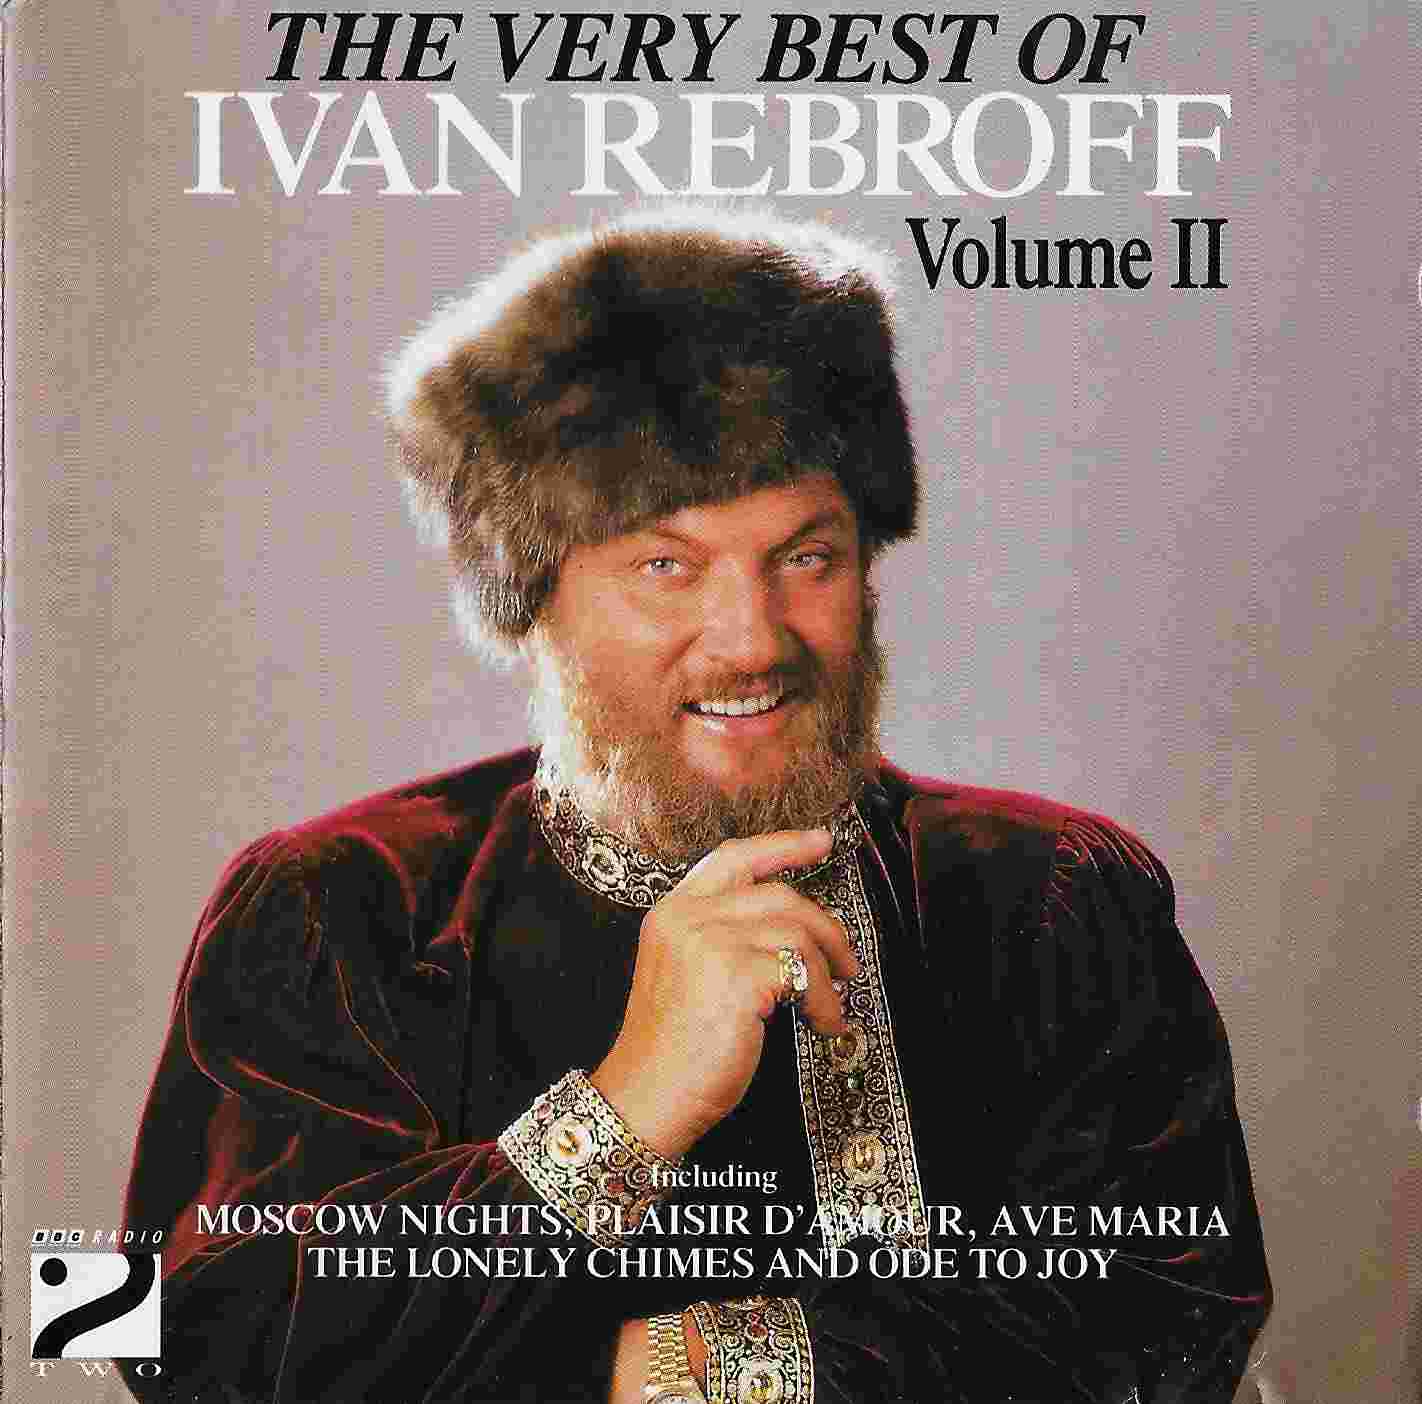 Picture of BBCCD848 The very best of Ivan Rebroff - Volume 2 by artist Various from the BBC cds - Records and Tapes library